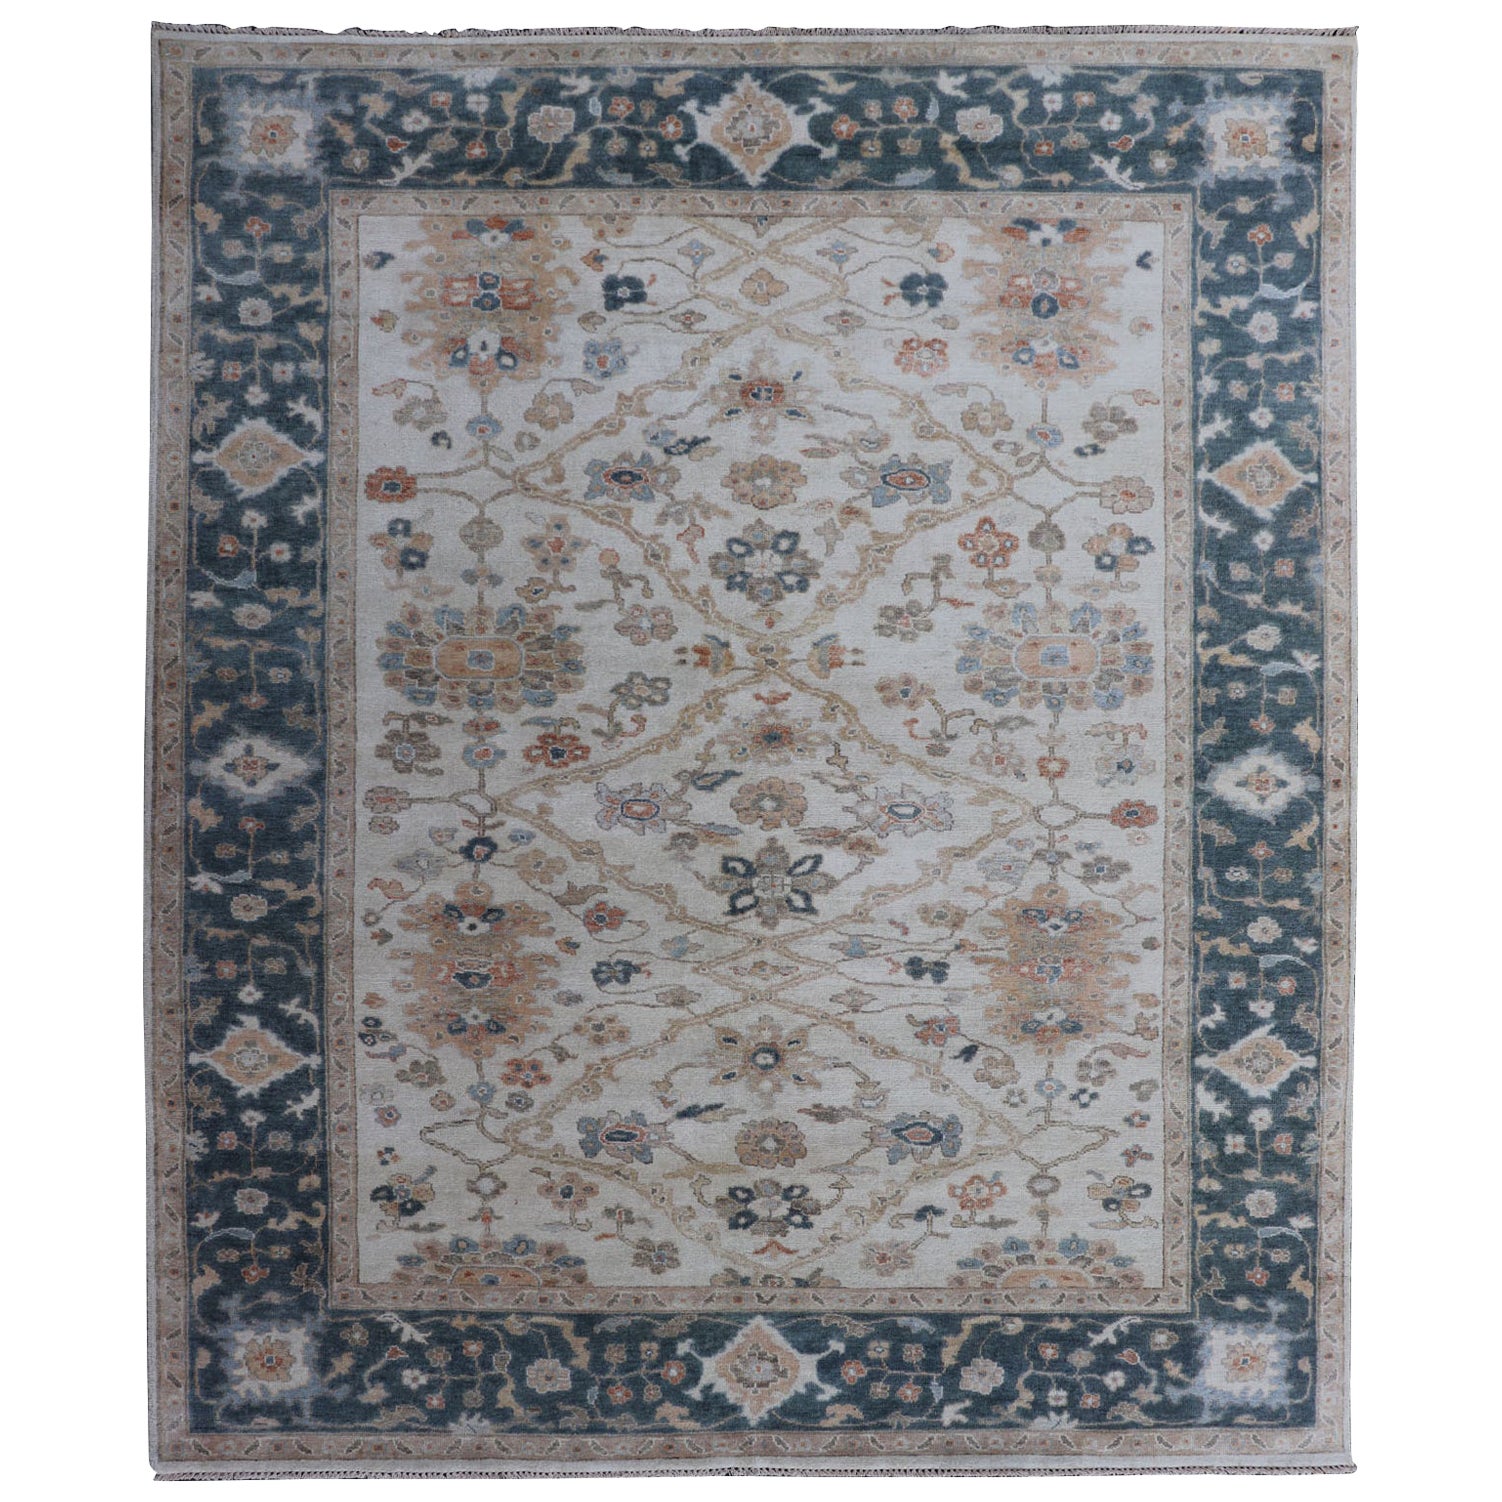 Hand-Knotted Sub-Floral Oushak Design Rug in Teal Blue, Cream and Multi Colors